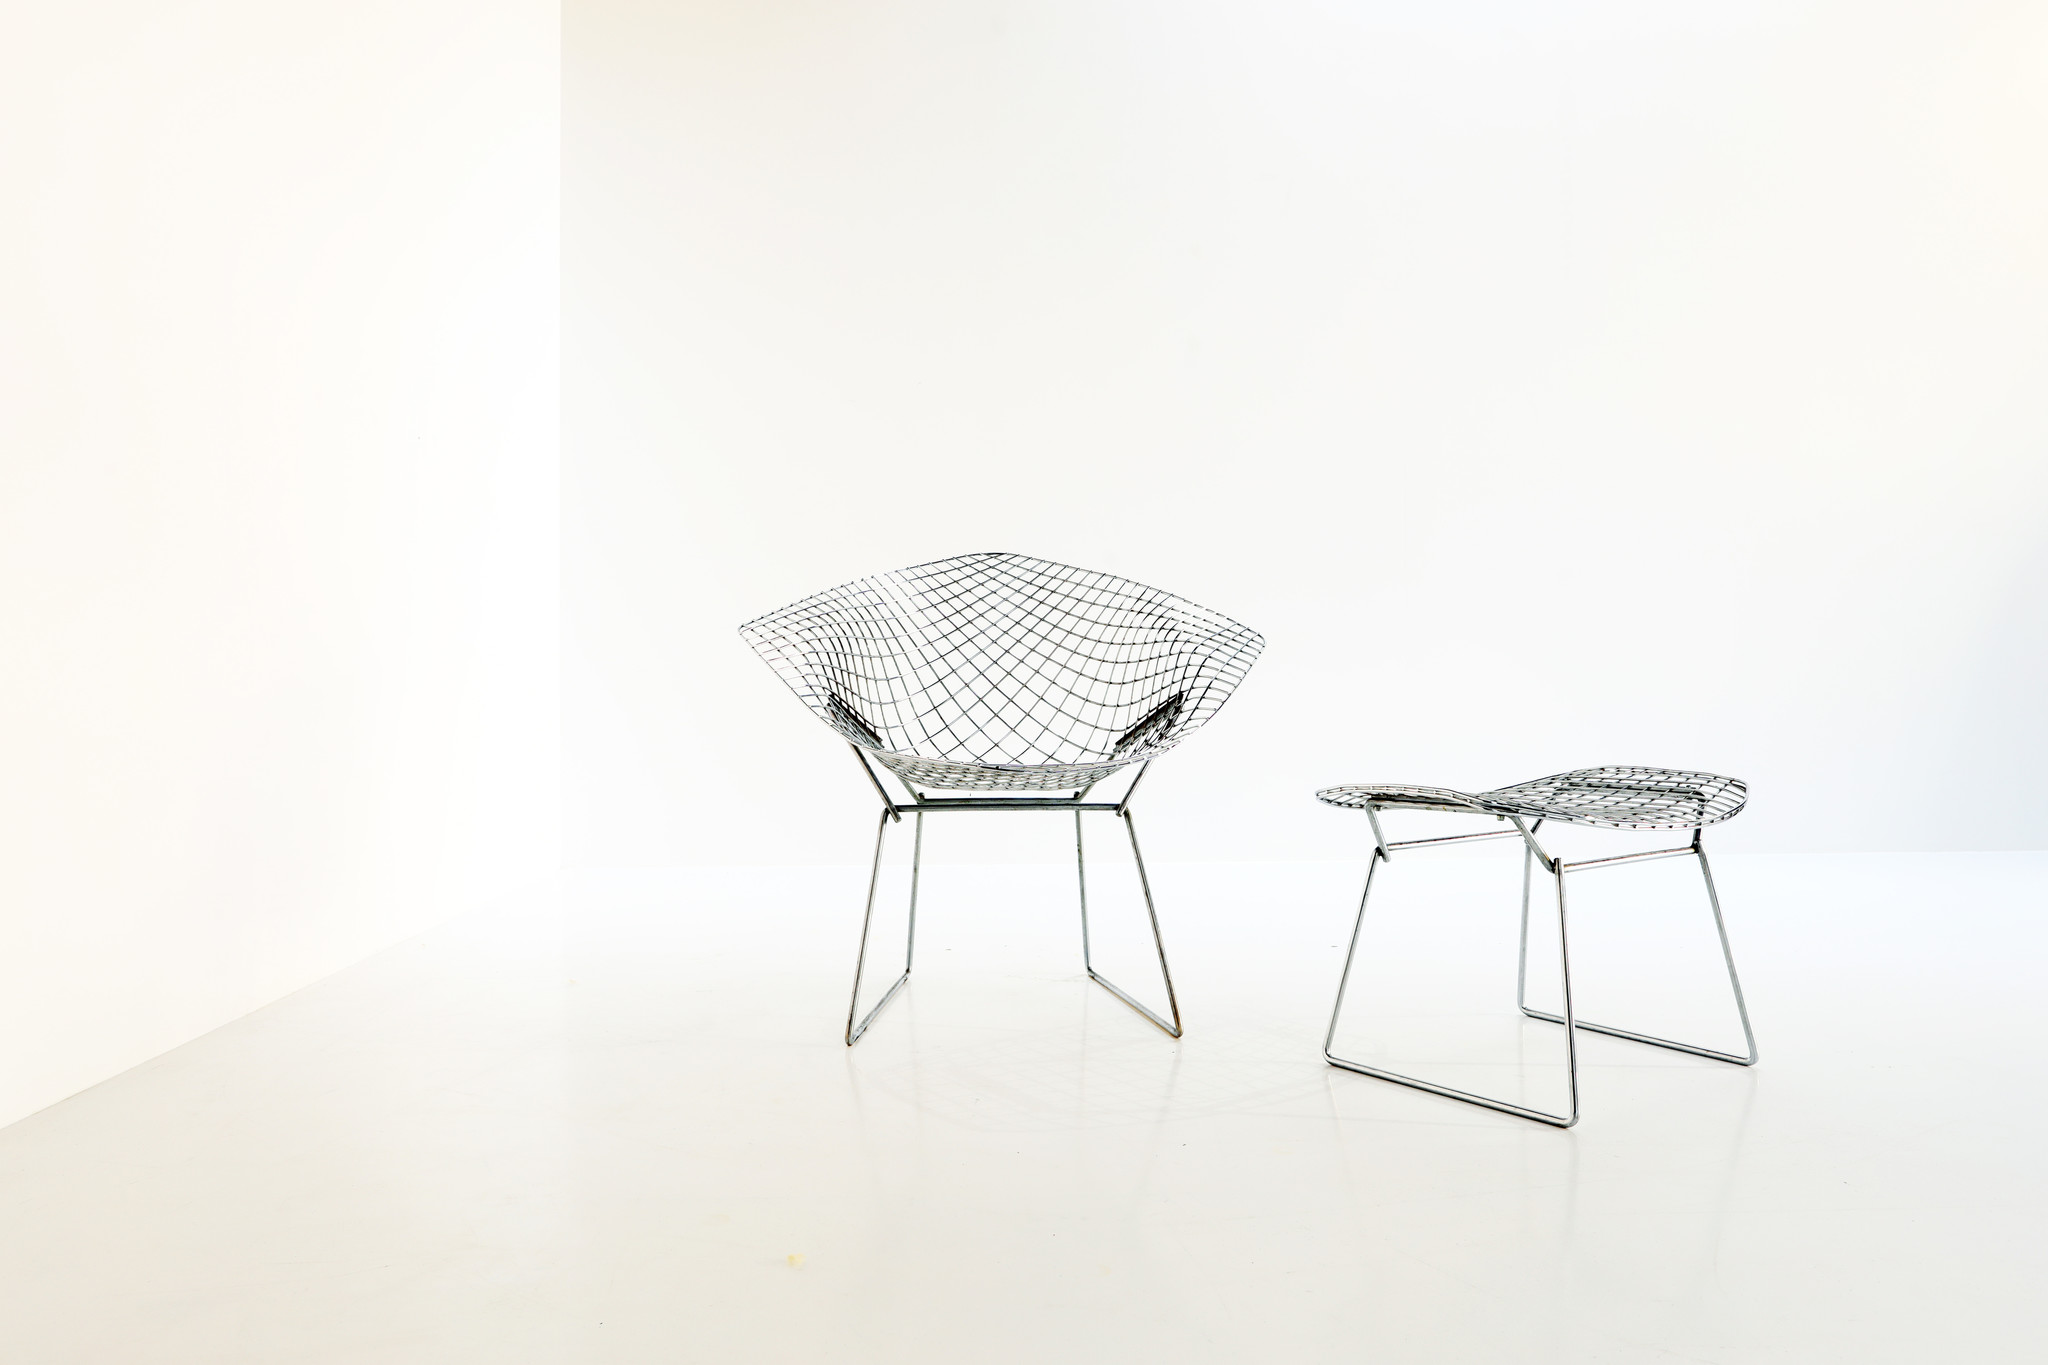 DIAMOND CHAIR DESIGNED BY HARRY BERTOIA FOR KNOLL AND PRODUCED BY DE COENE